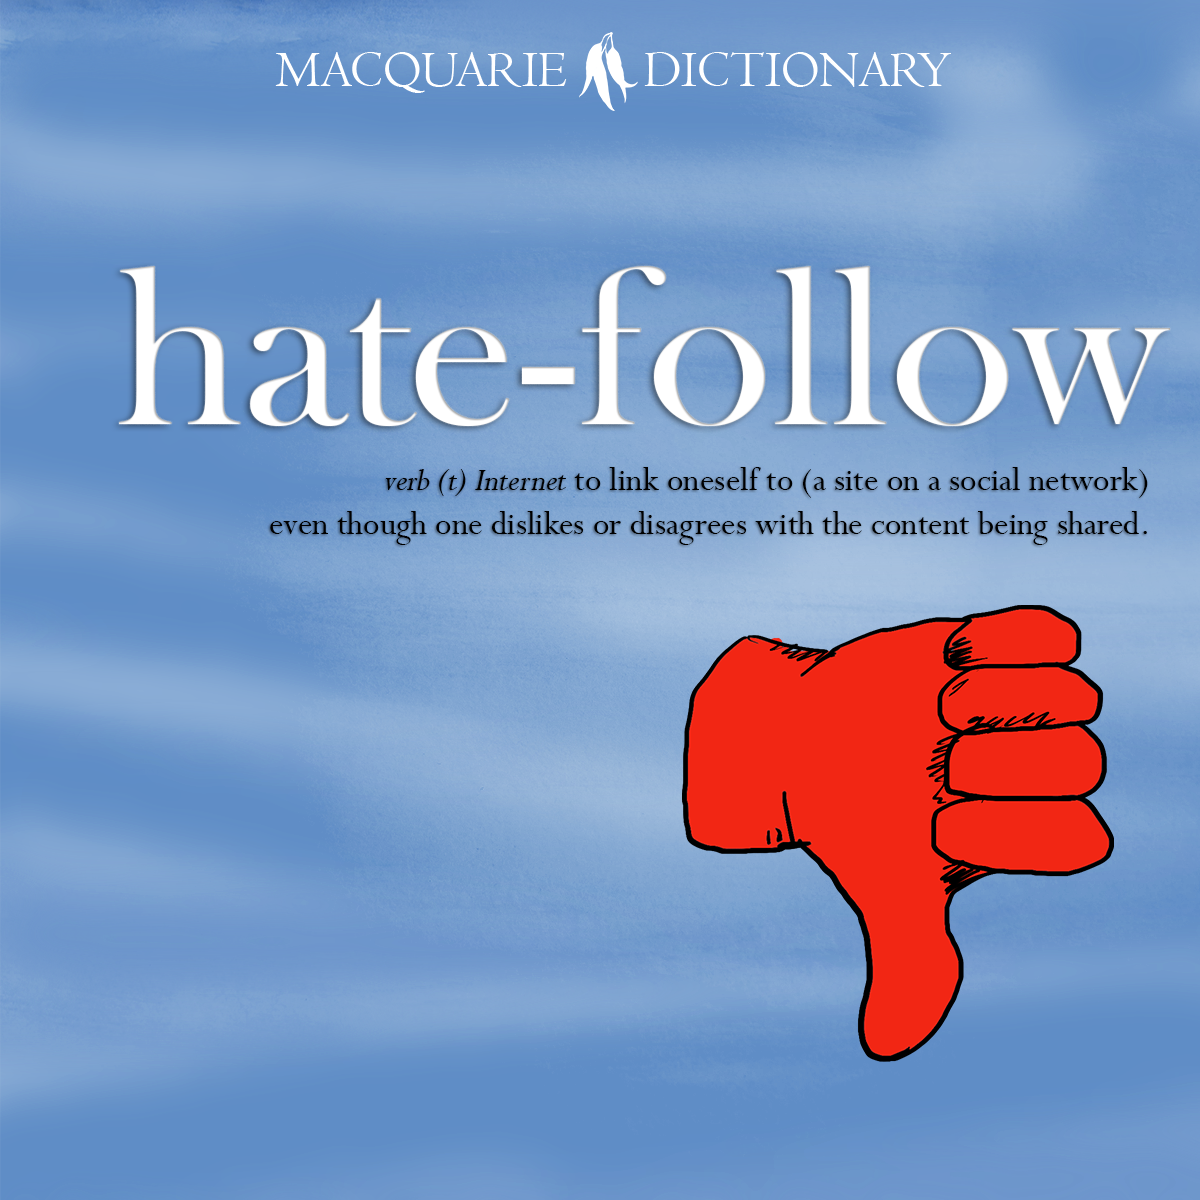 Word of the Year 2021 - hate-follow